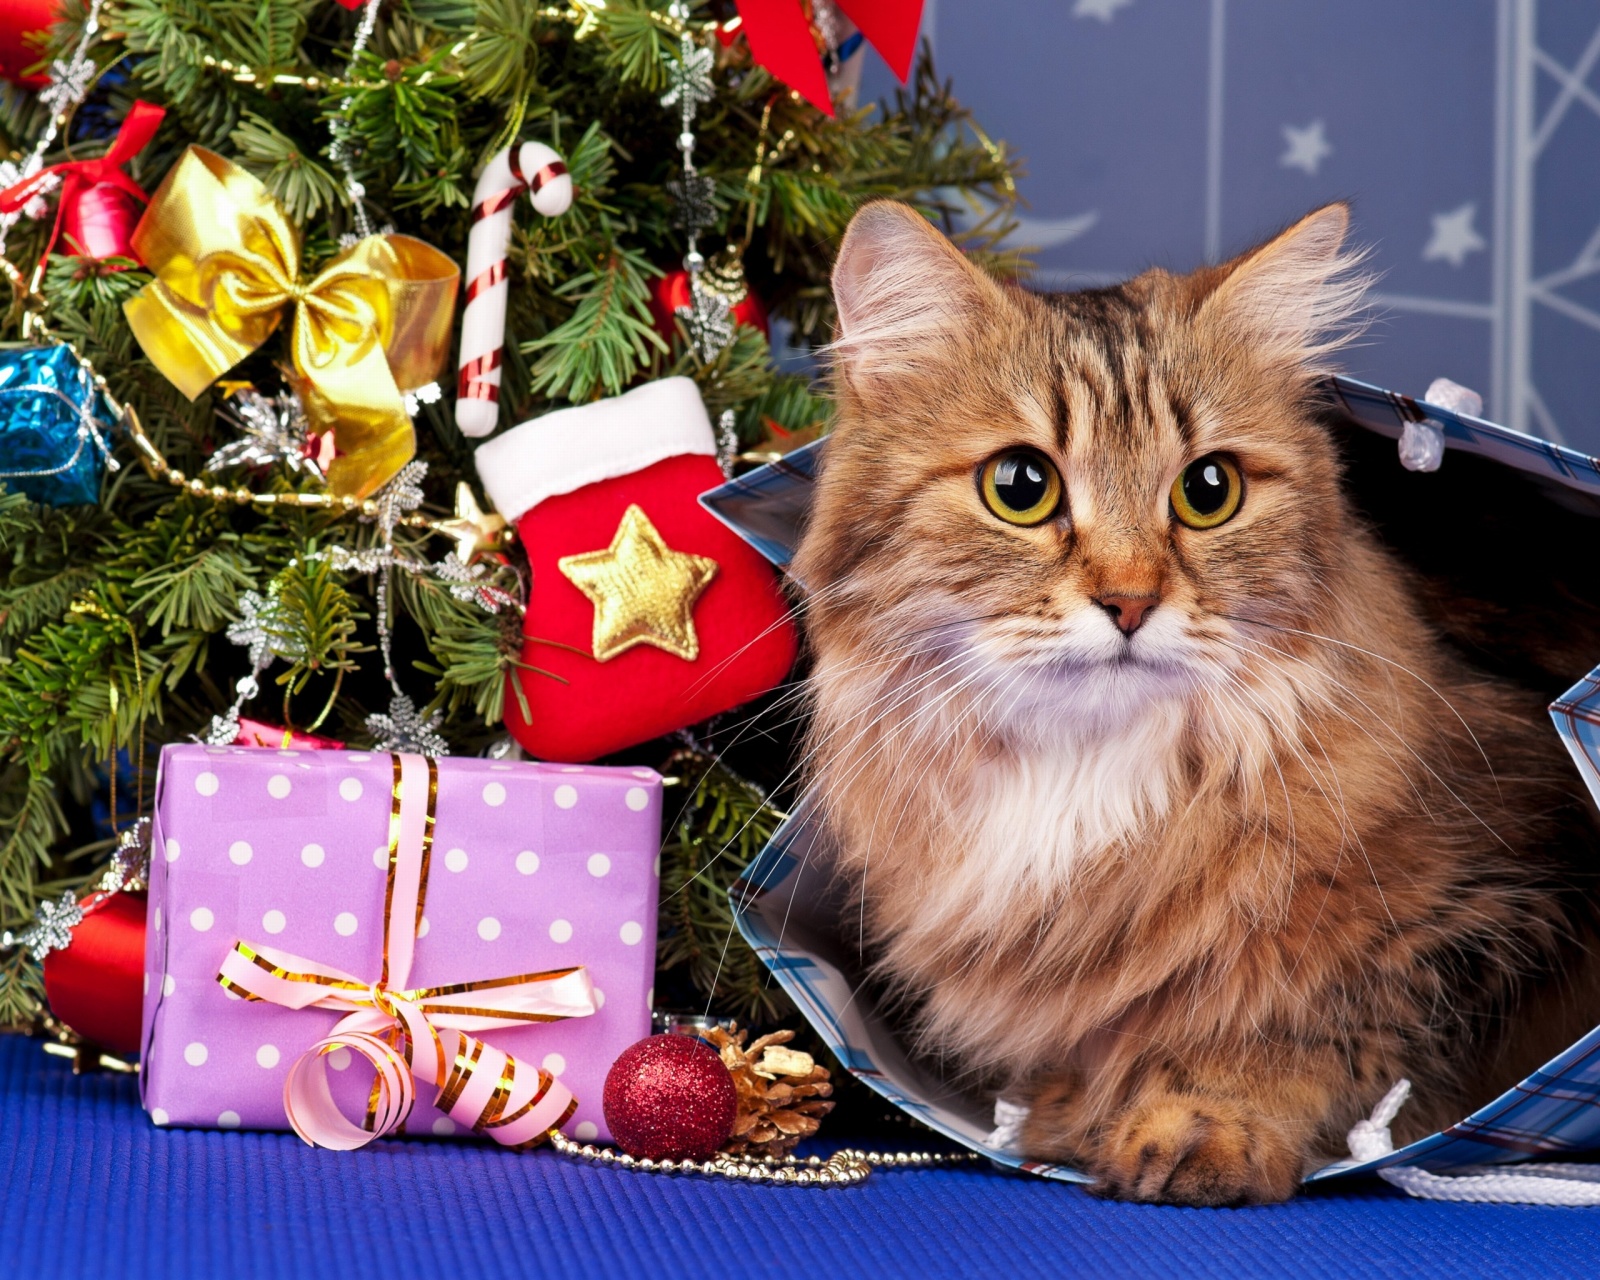 Merry Christmas Cards Wishes with Cat wallpaper 1600x1280